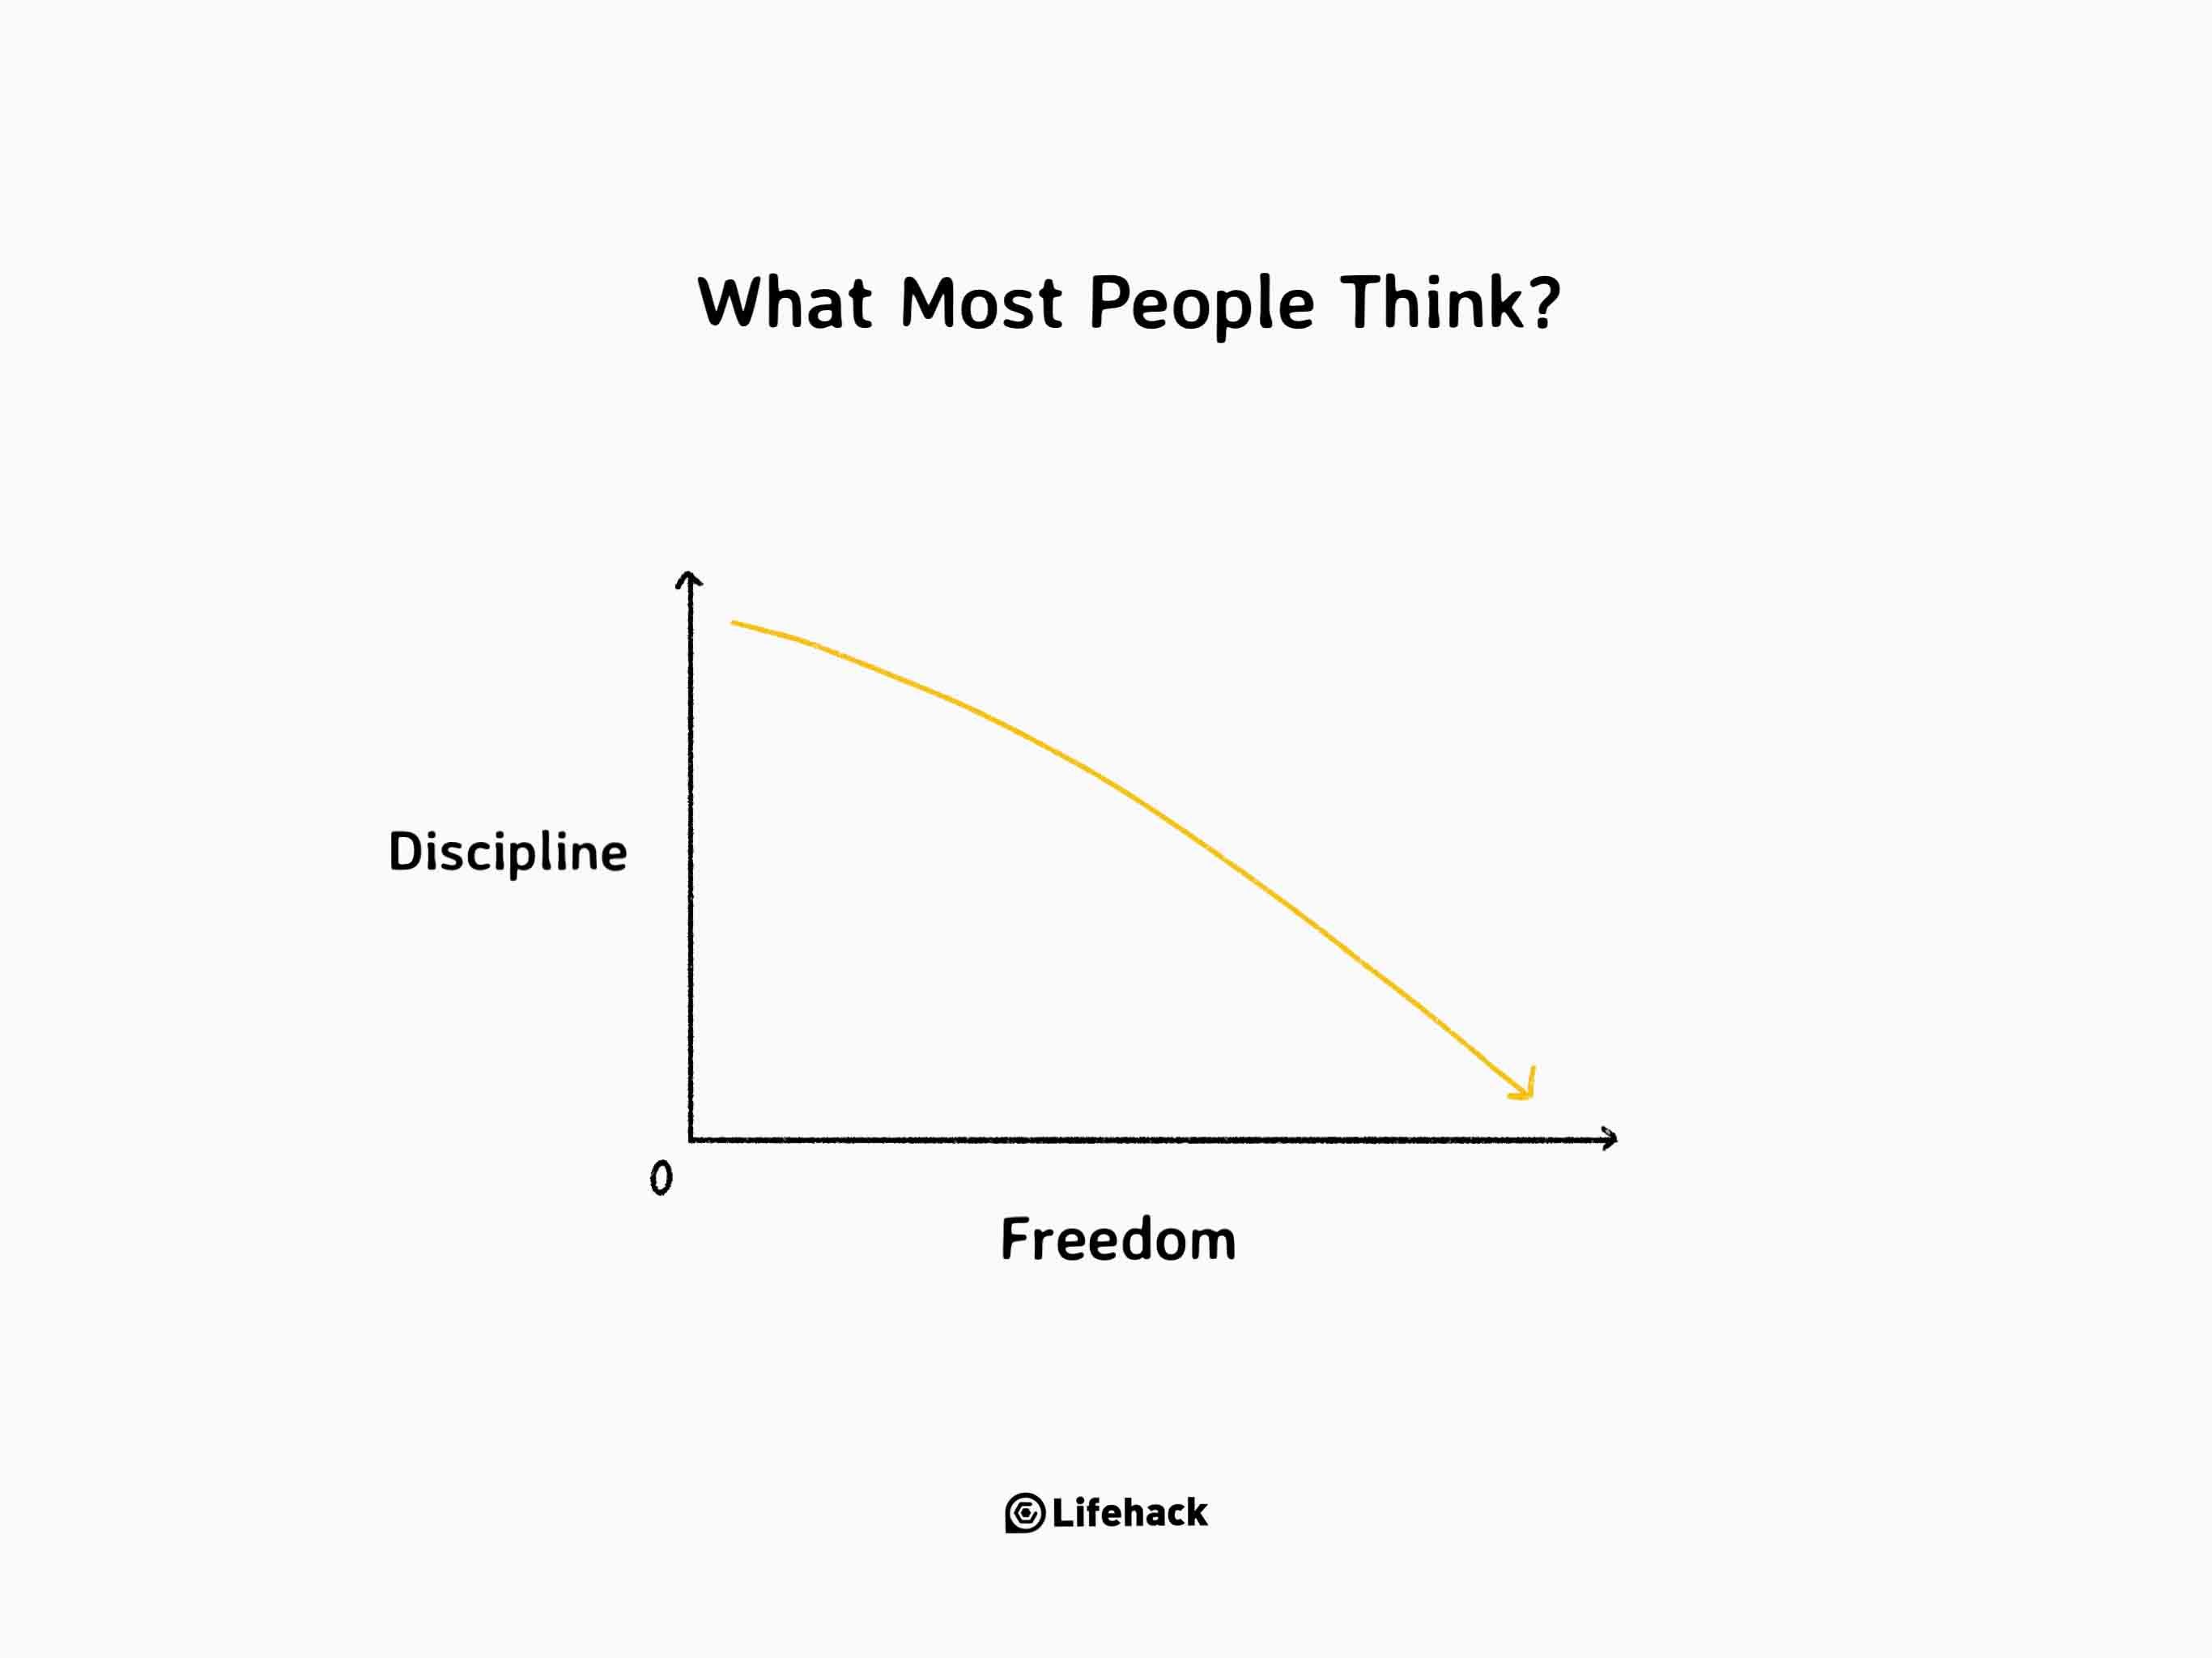 Does Less Discipline Equal More Freedom?